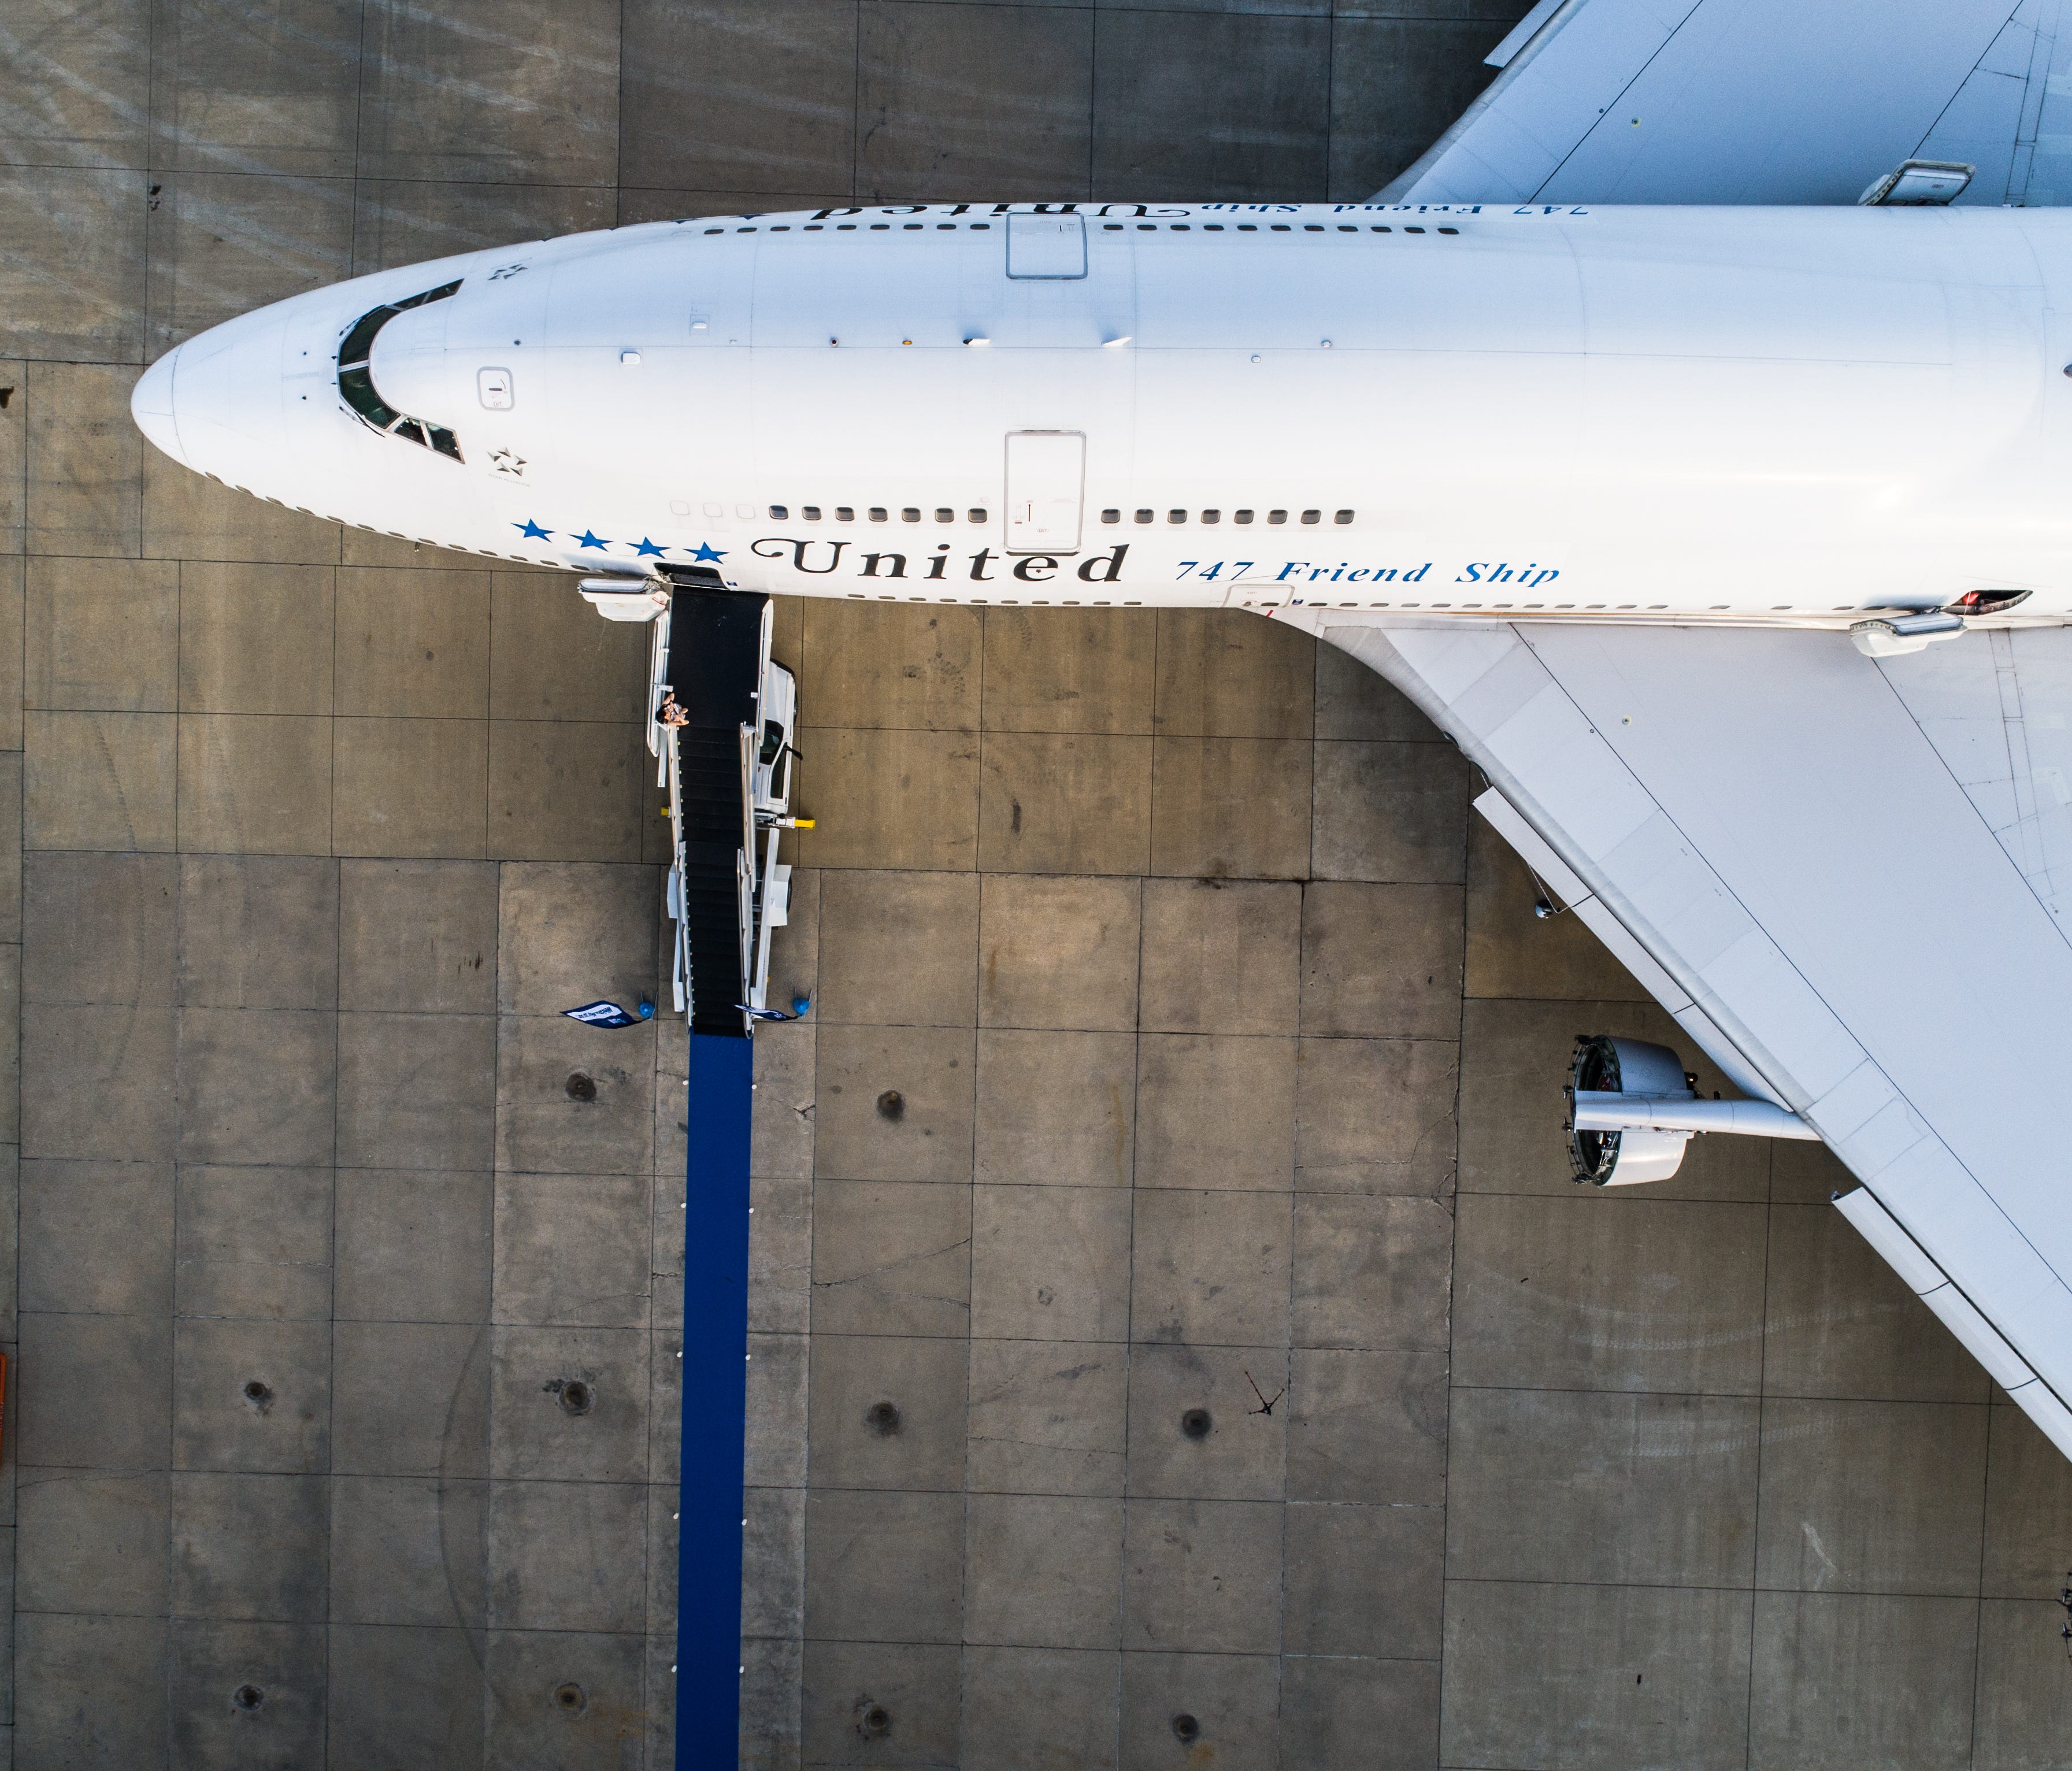 United's last-ever Boeing 747 to be used for revenue passenger service is seen at the Universal Asset Management (UAM) Aircraft Disassembly Center in Tupelo, Miss., on June 2, 2018.